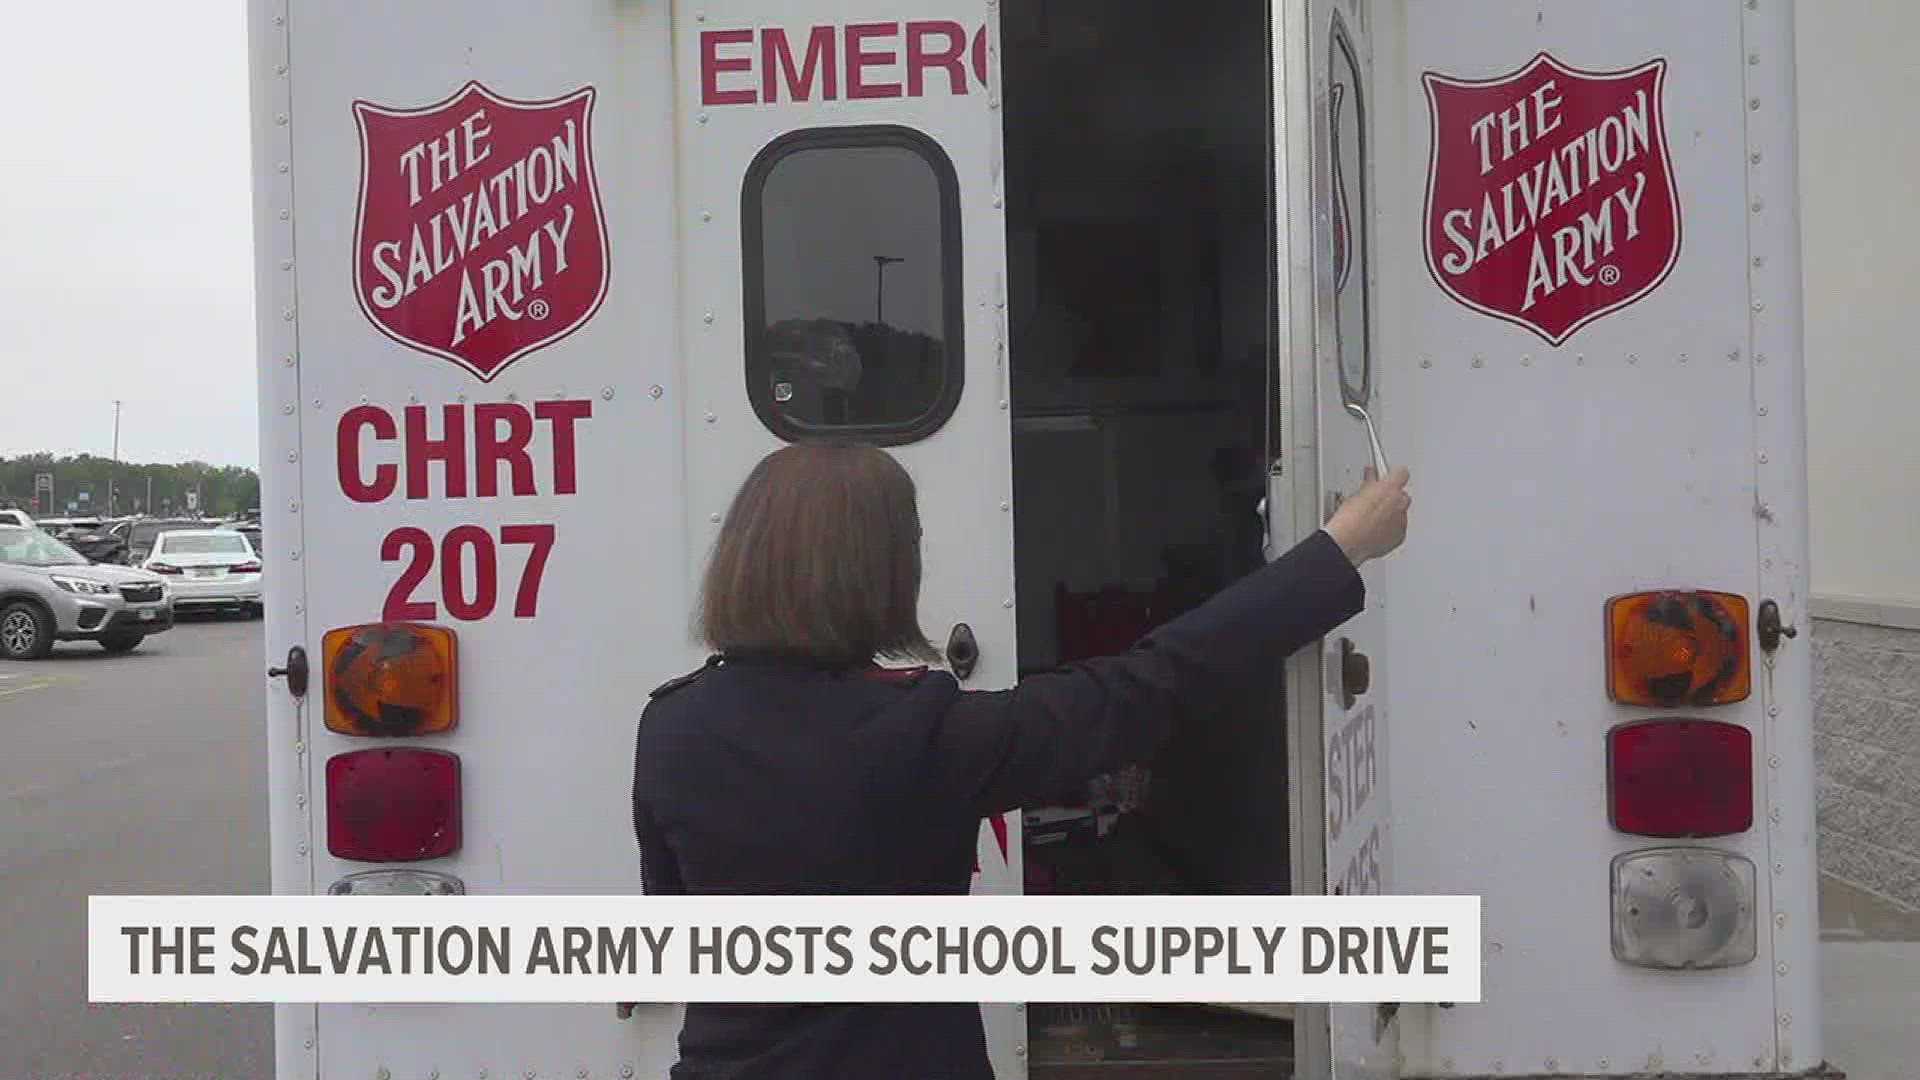 The group's "Stuff the Bus" campaign aims to provide low-income families with school supplies with donation drives taking place at Quad City area Walmart locations.